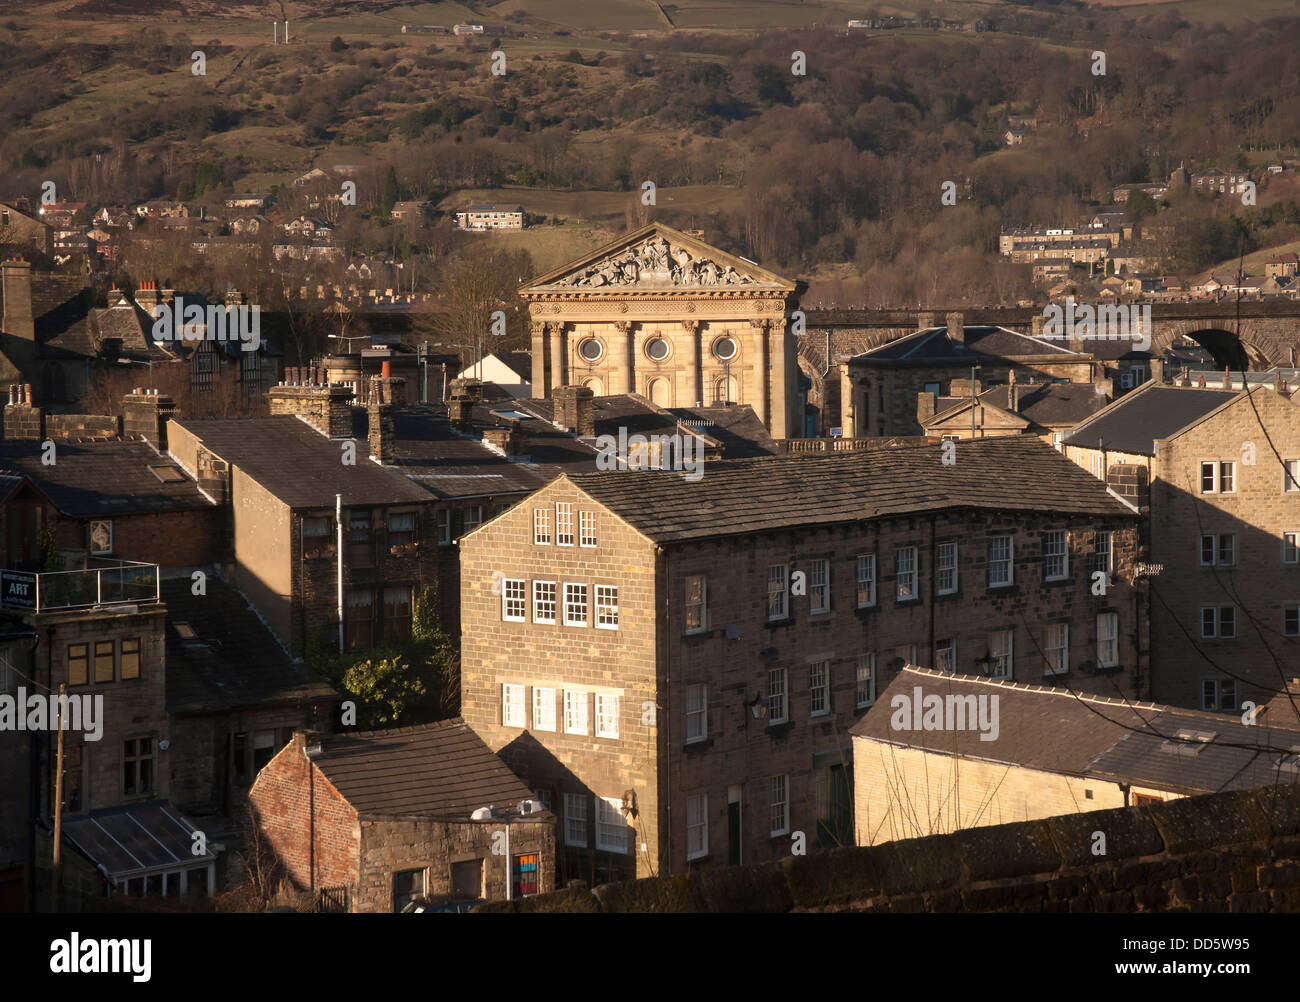 The Greco Roman sandstone built town hall in Todmorden Lancashire Stock Photo